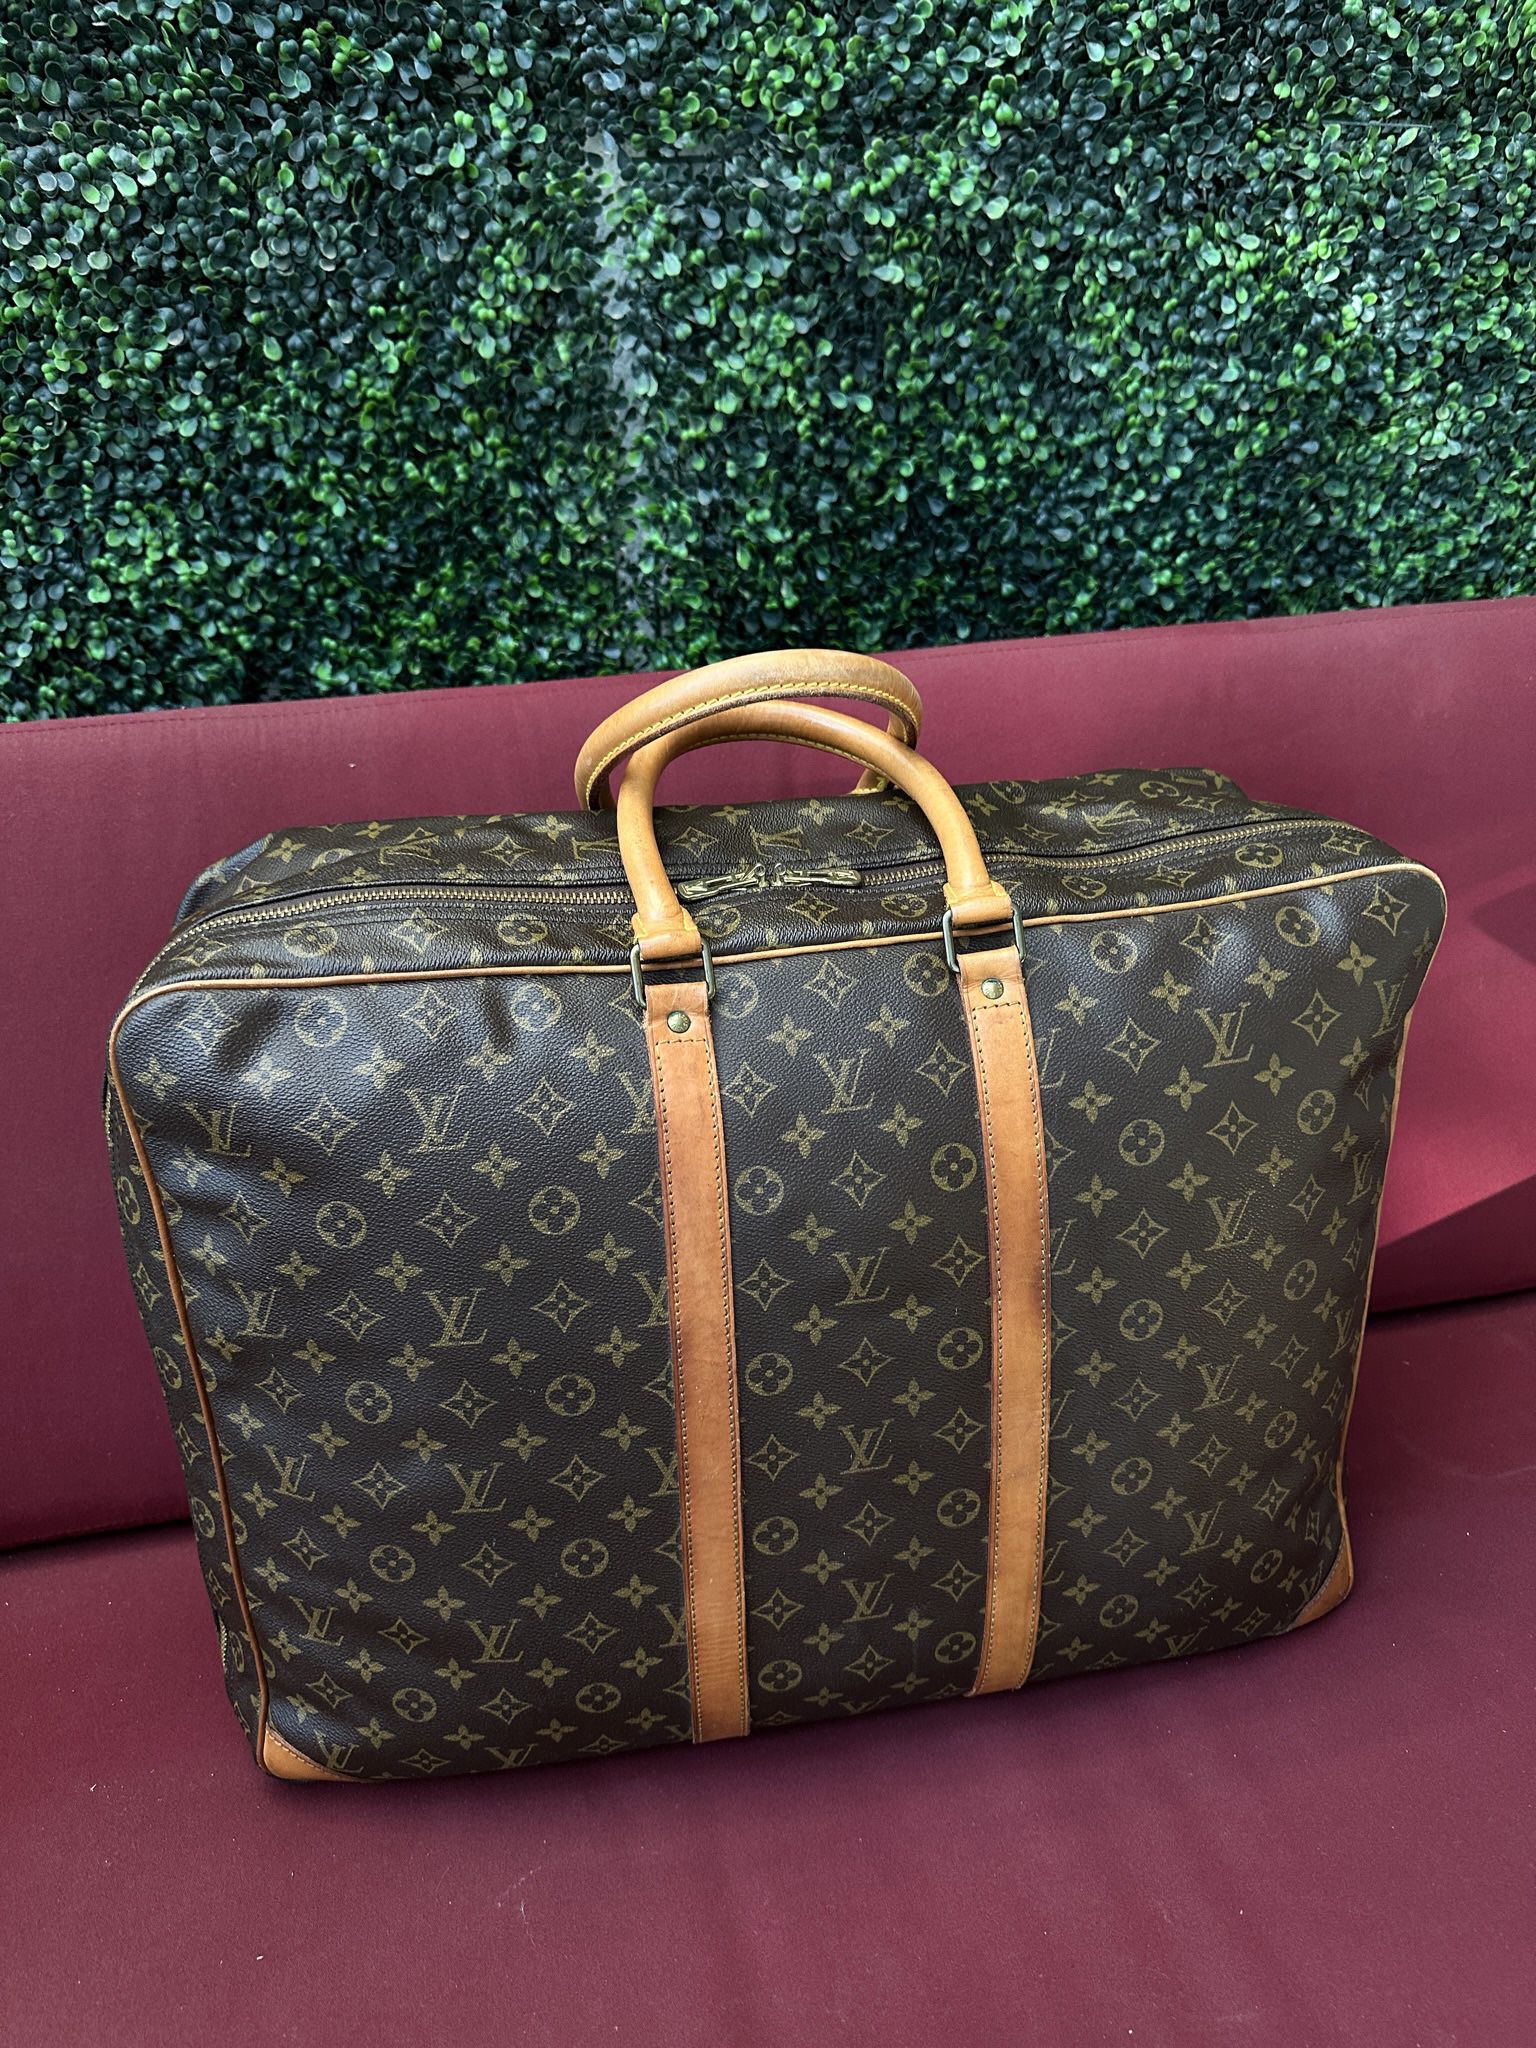 Louis Vuitton Bags Real/Authentic/As New for Sale in Phoenix, AZ - OfferUp